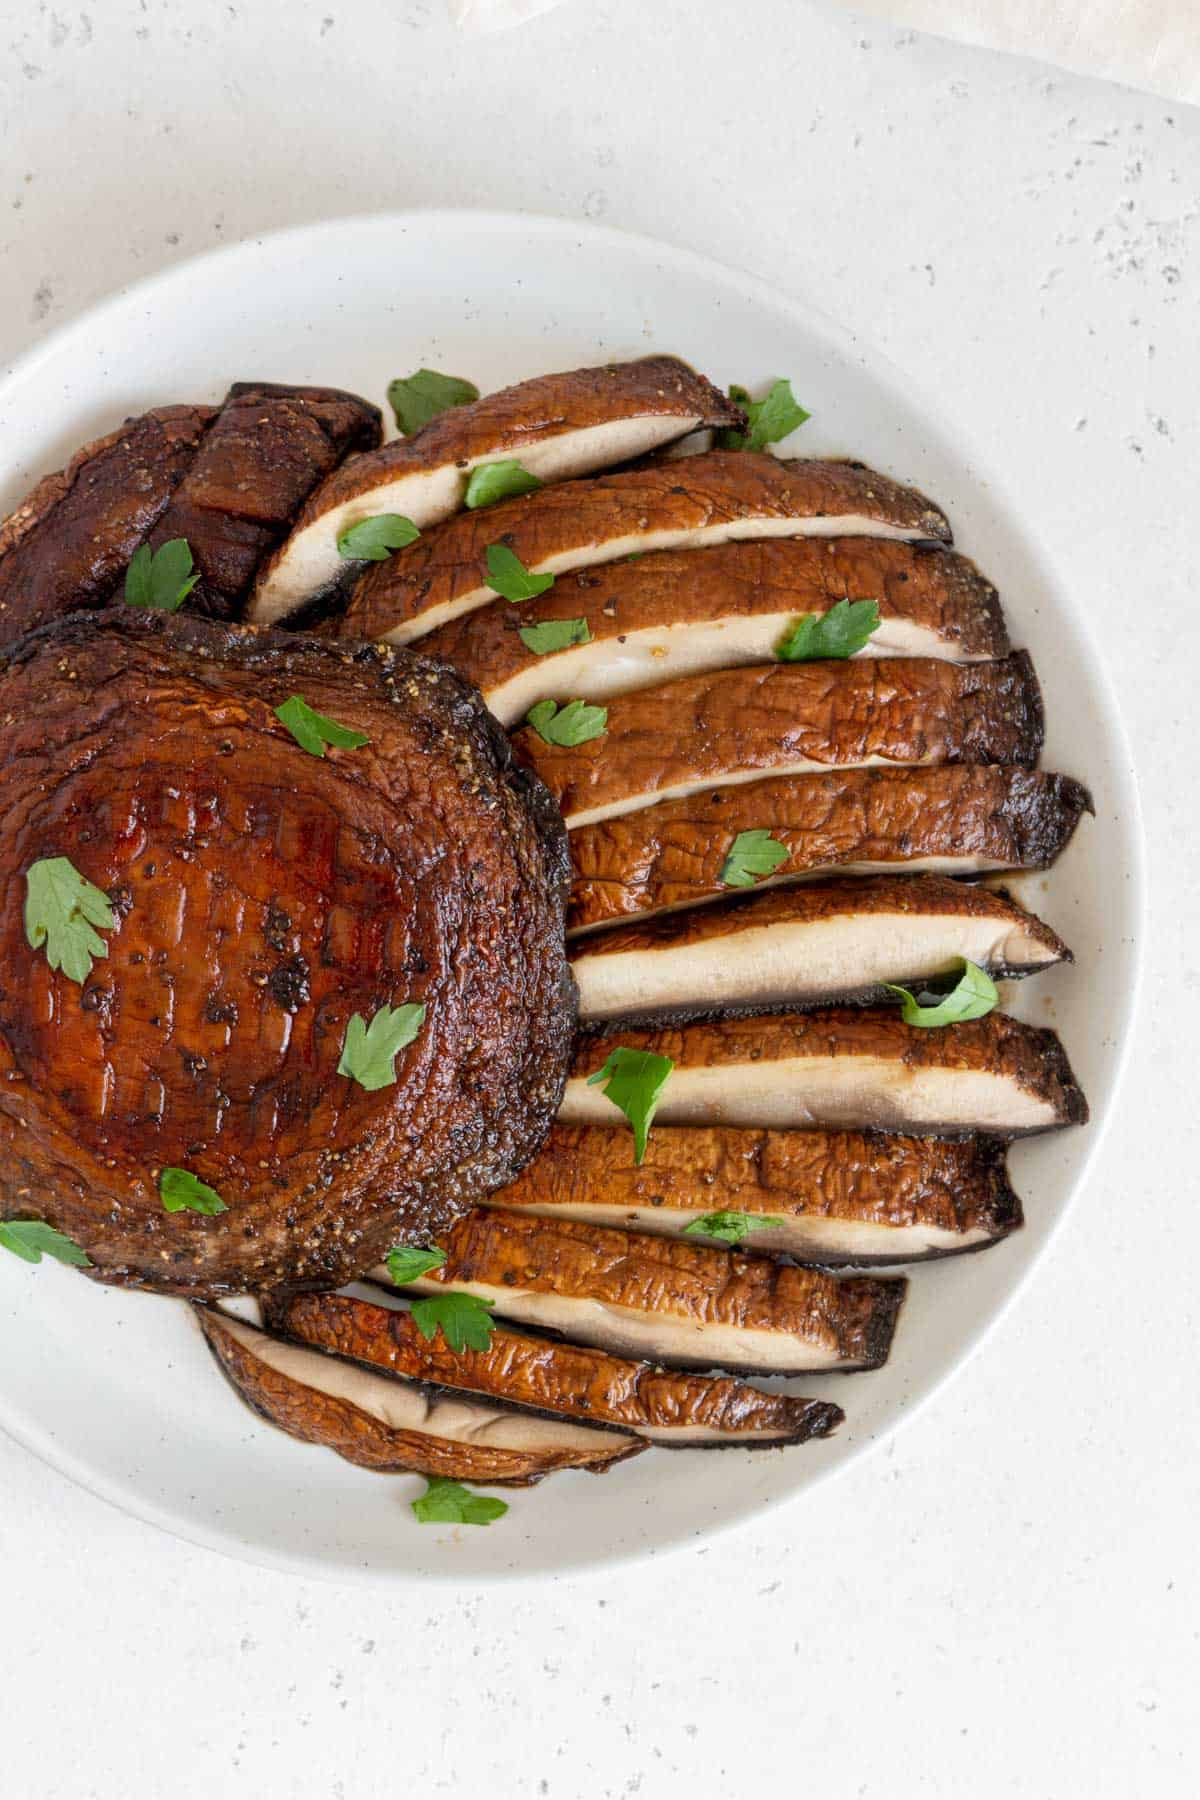 Overhead view of a plate with sliced air fryer portobello mushrooms on a plate with one full mushroom.